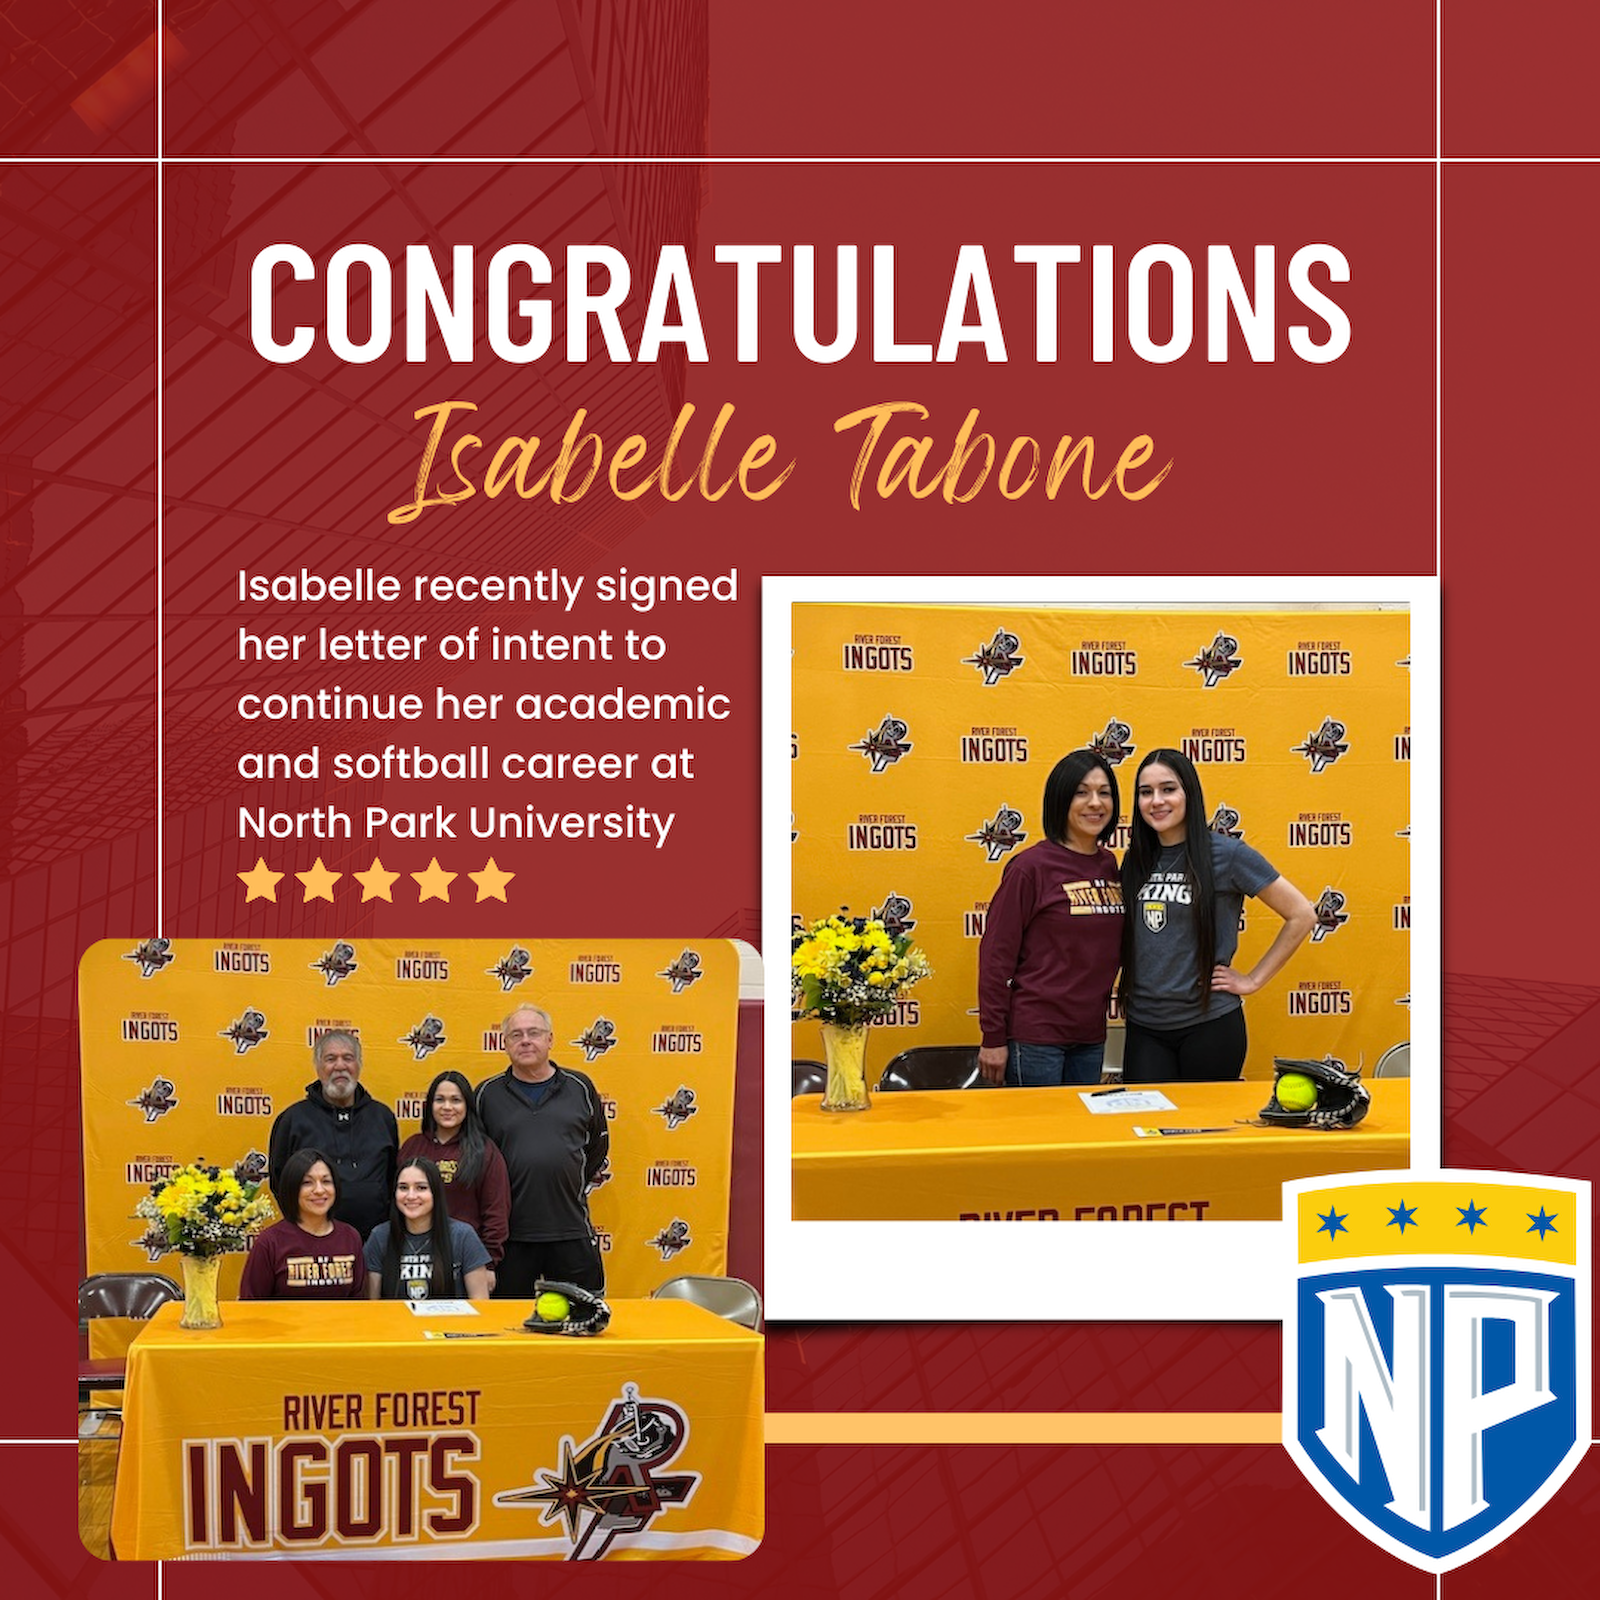 Isabelle Tabone signed with North Park University today to continue her academic & softball career gallery cover photo